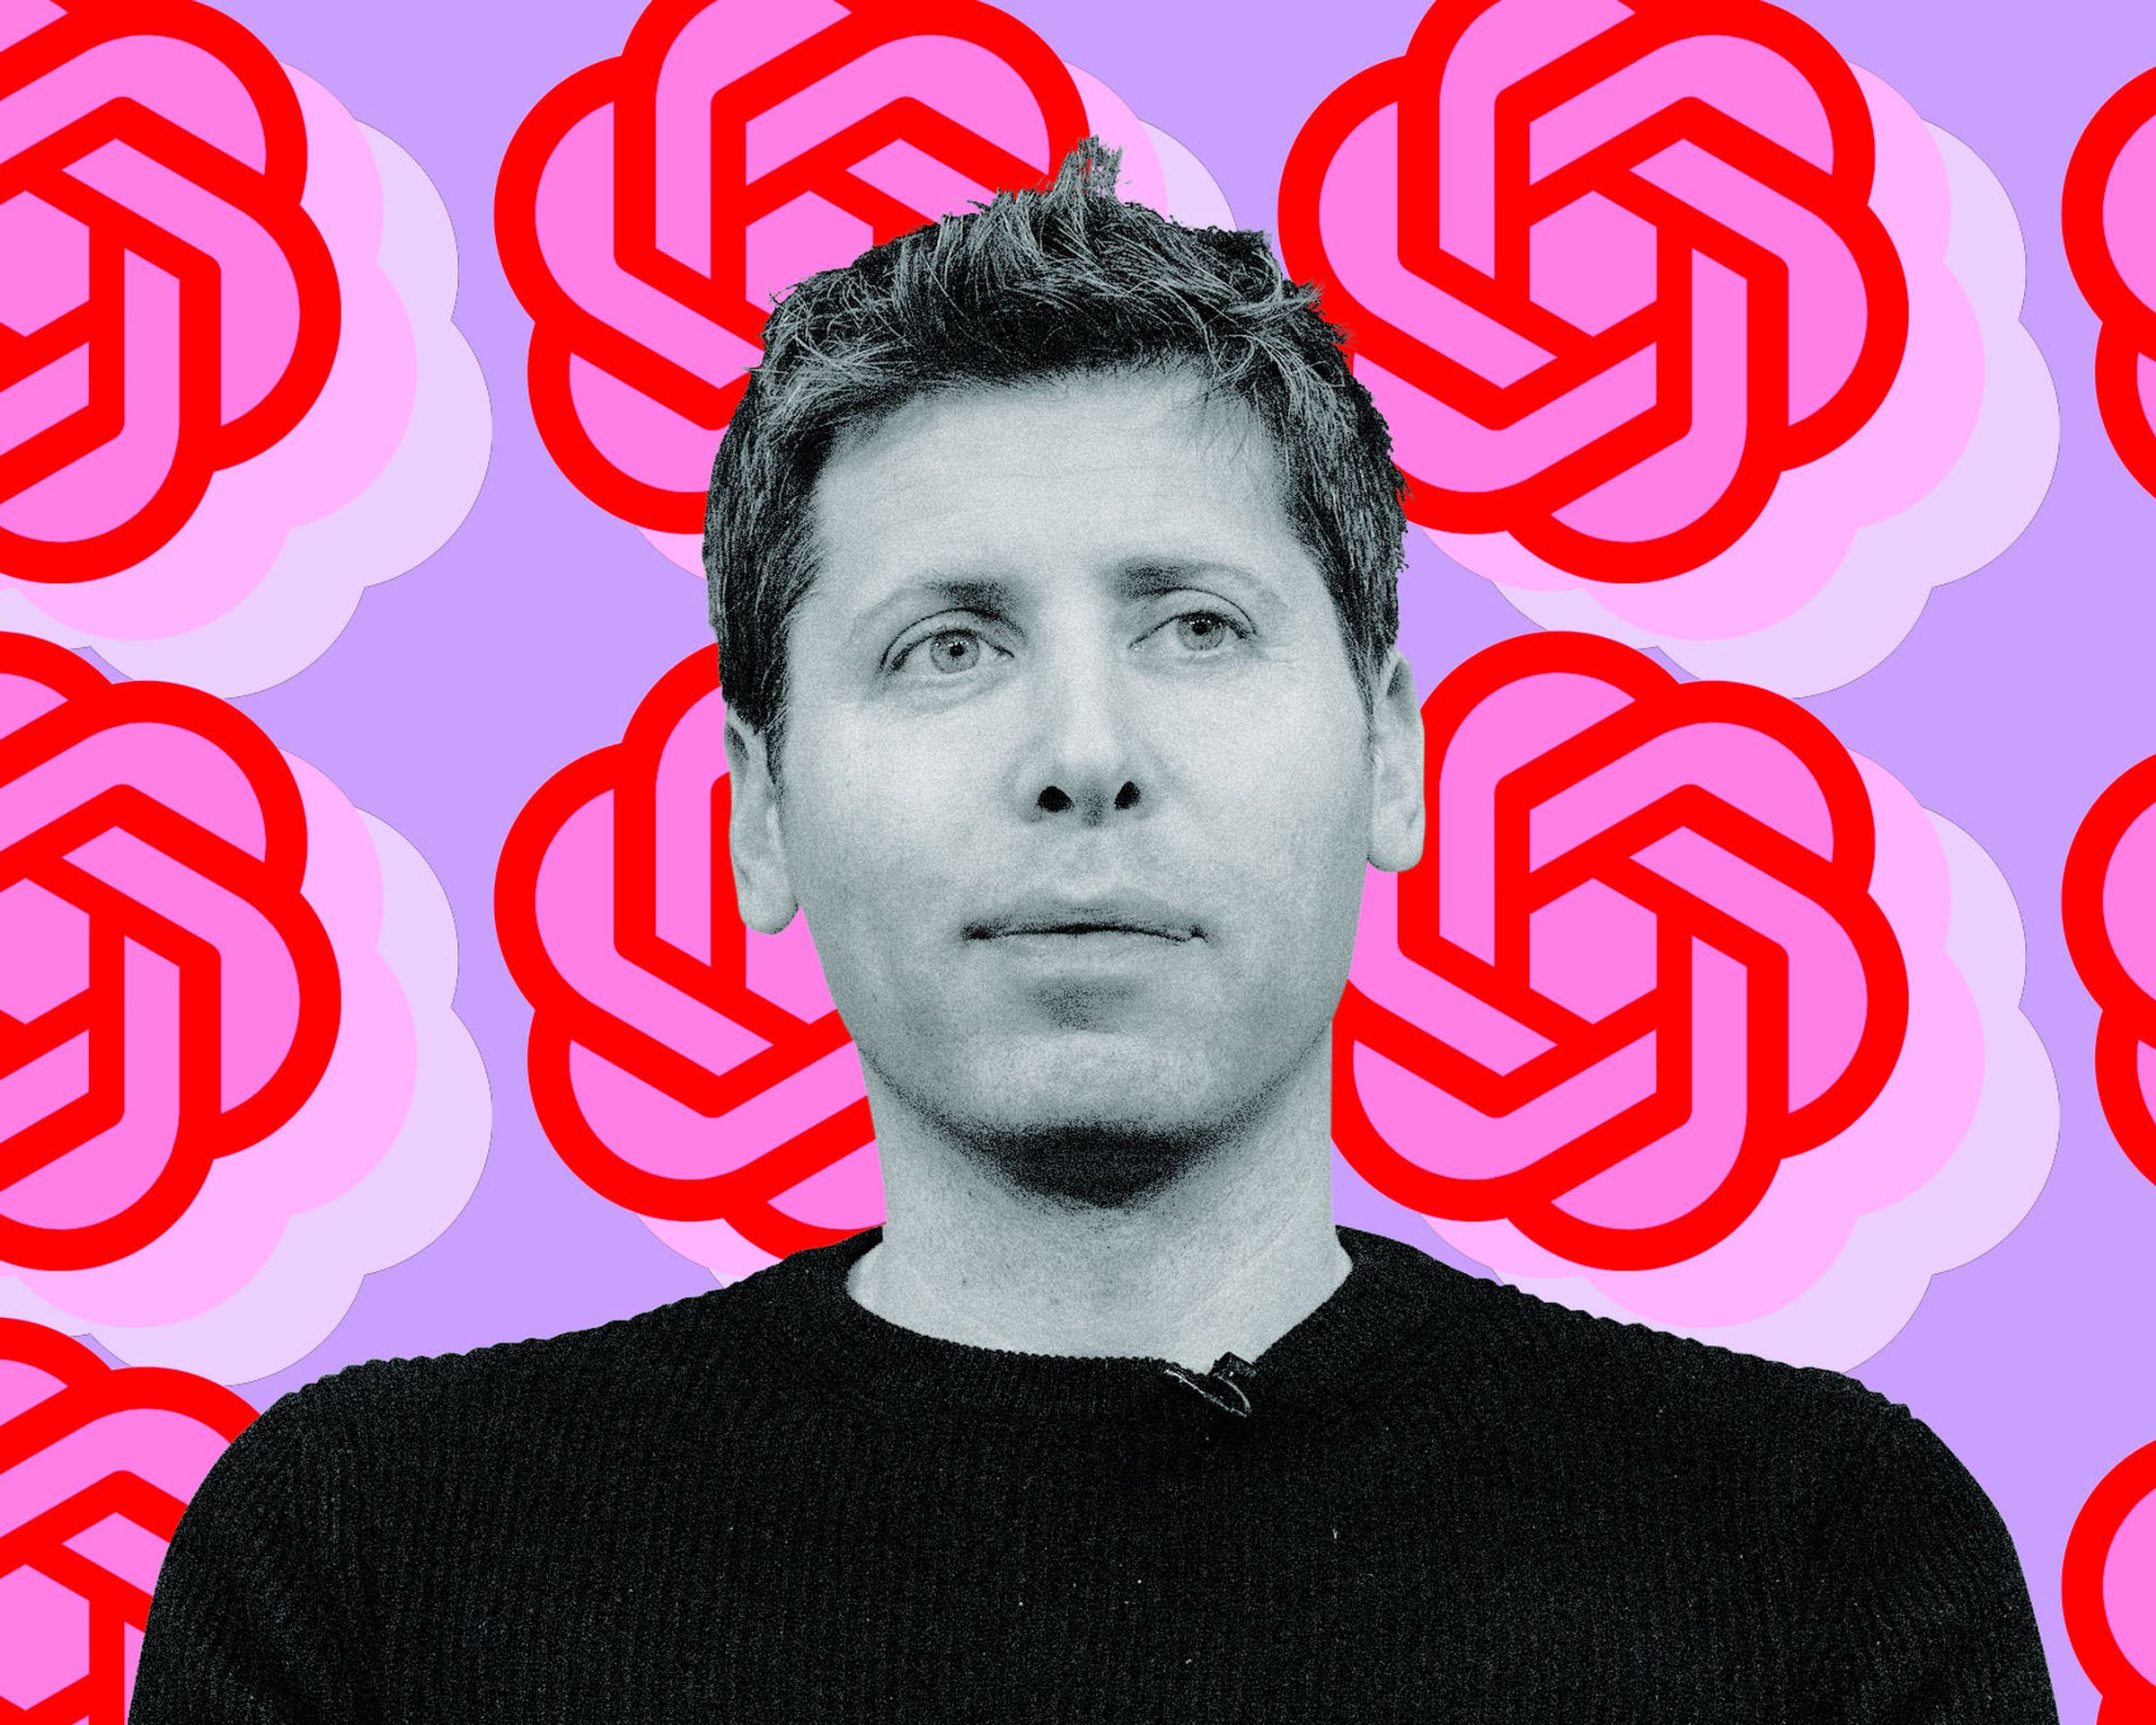 Photo collage of Sam Altman in front of the OpenAI logo.